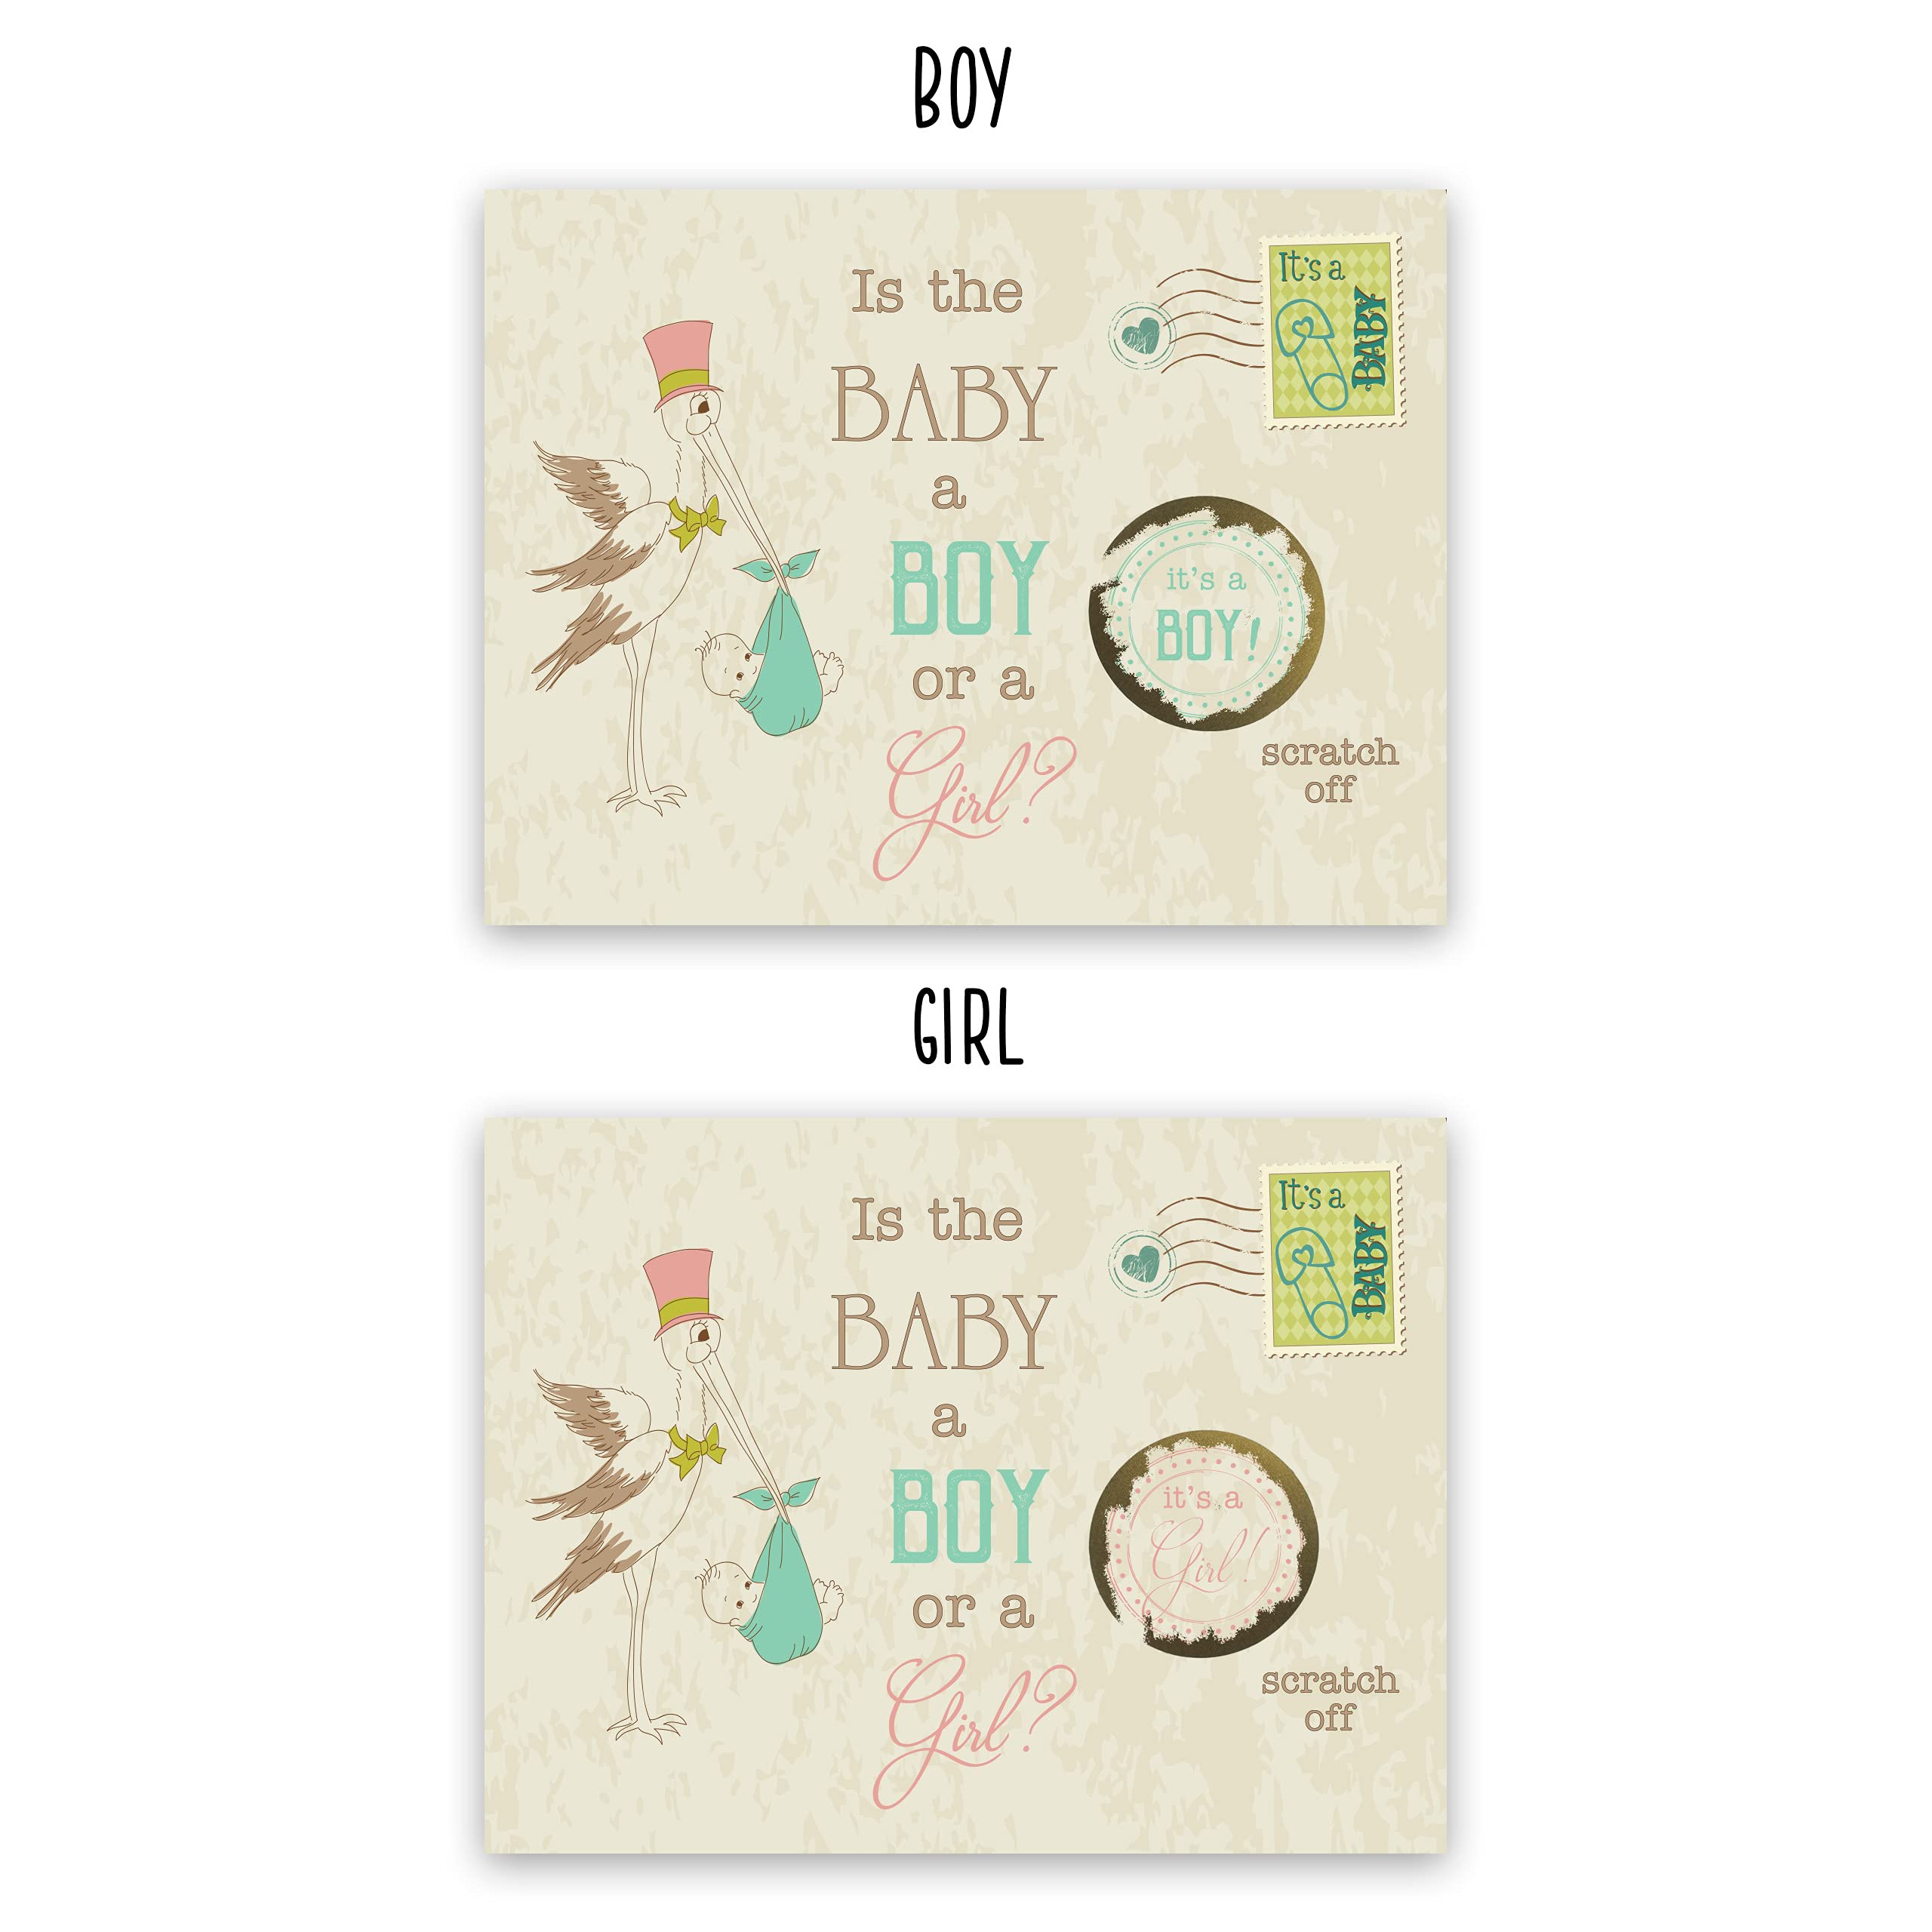 My Scratch Offs - Its a Girl Vintage Stork Gender Reveal Scratch Off Cards - Pack of 25 for Gender Reveal Games Fun Baby Gender Reveal Ideas for Family and Guests